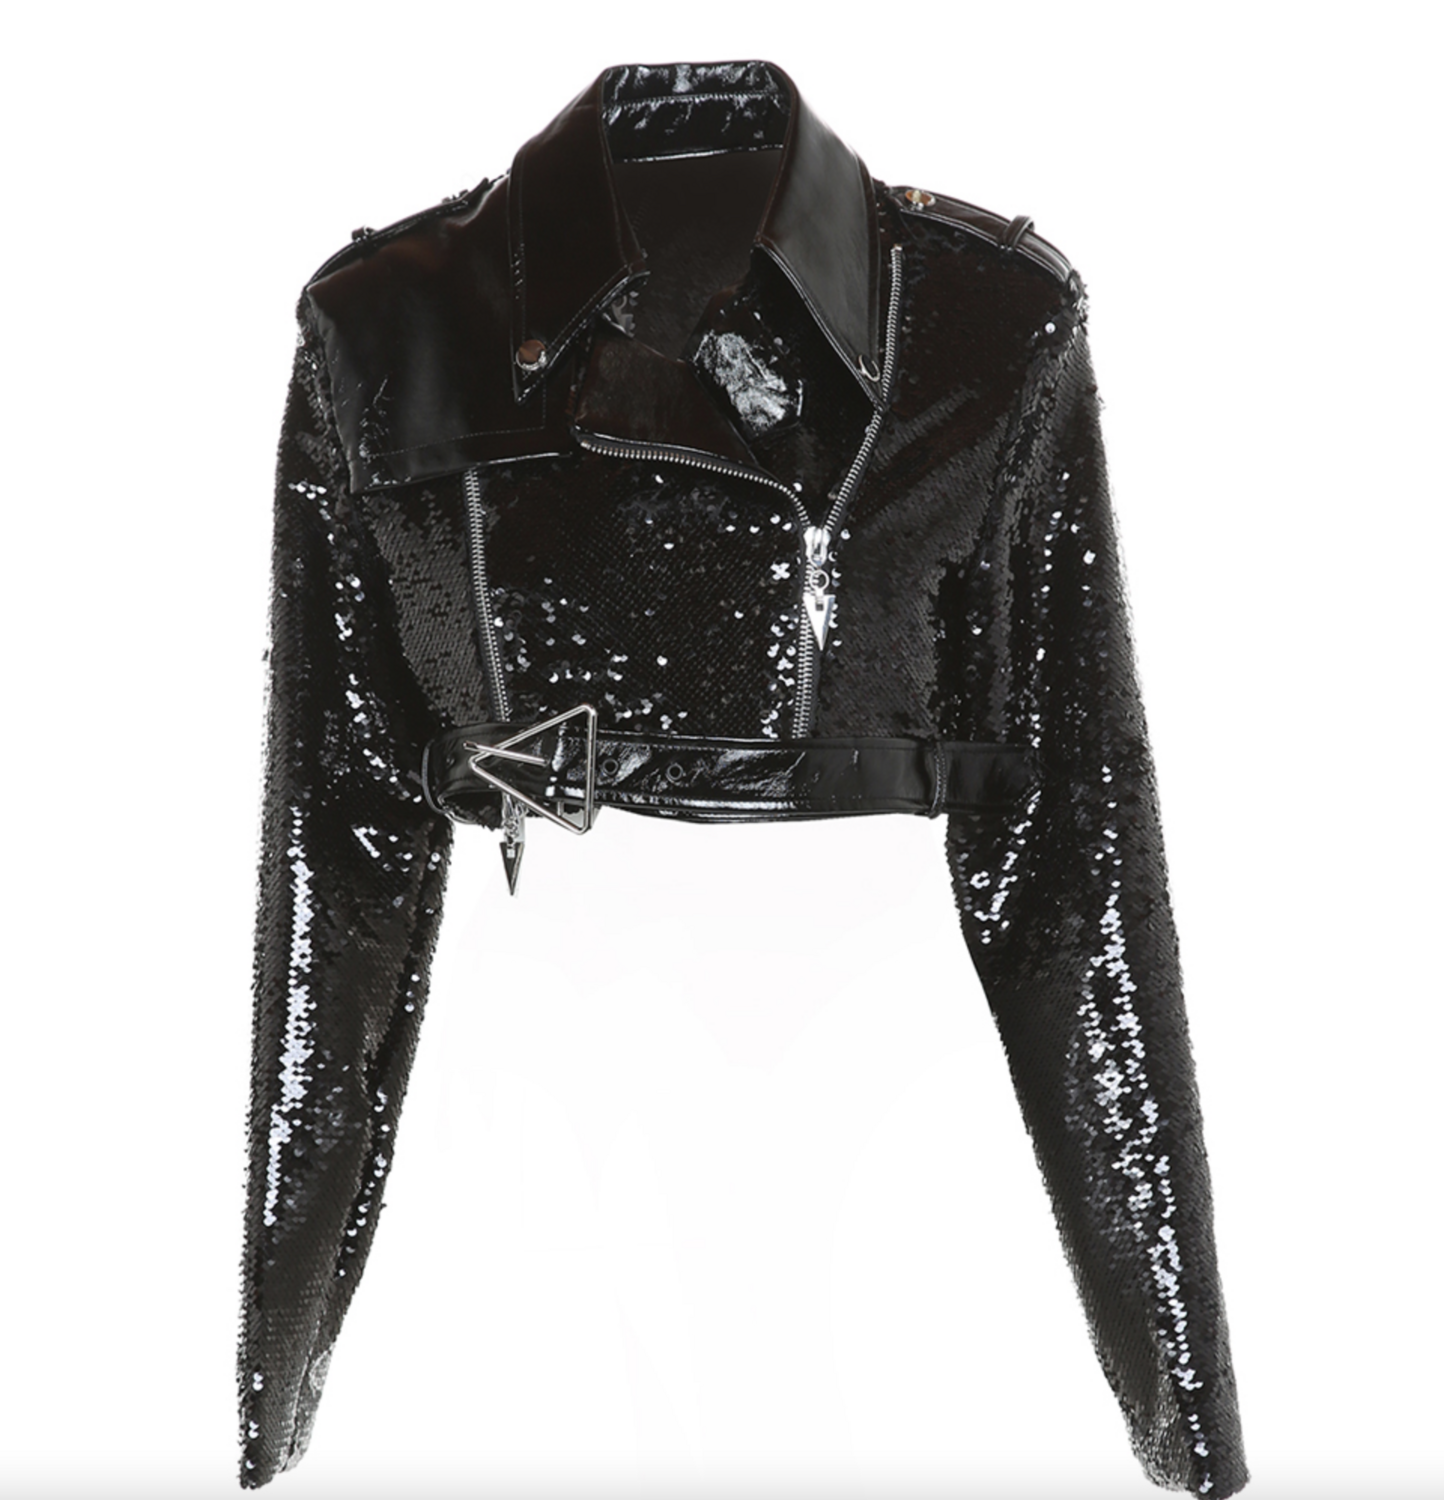 Motorcycle jacket with sequencesKC4099